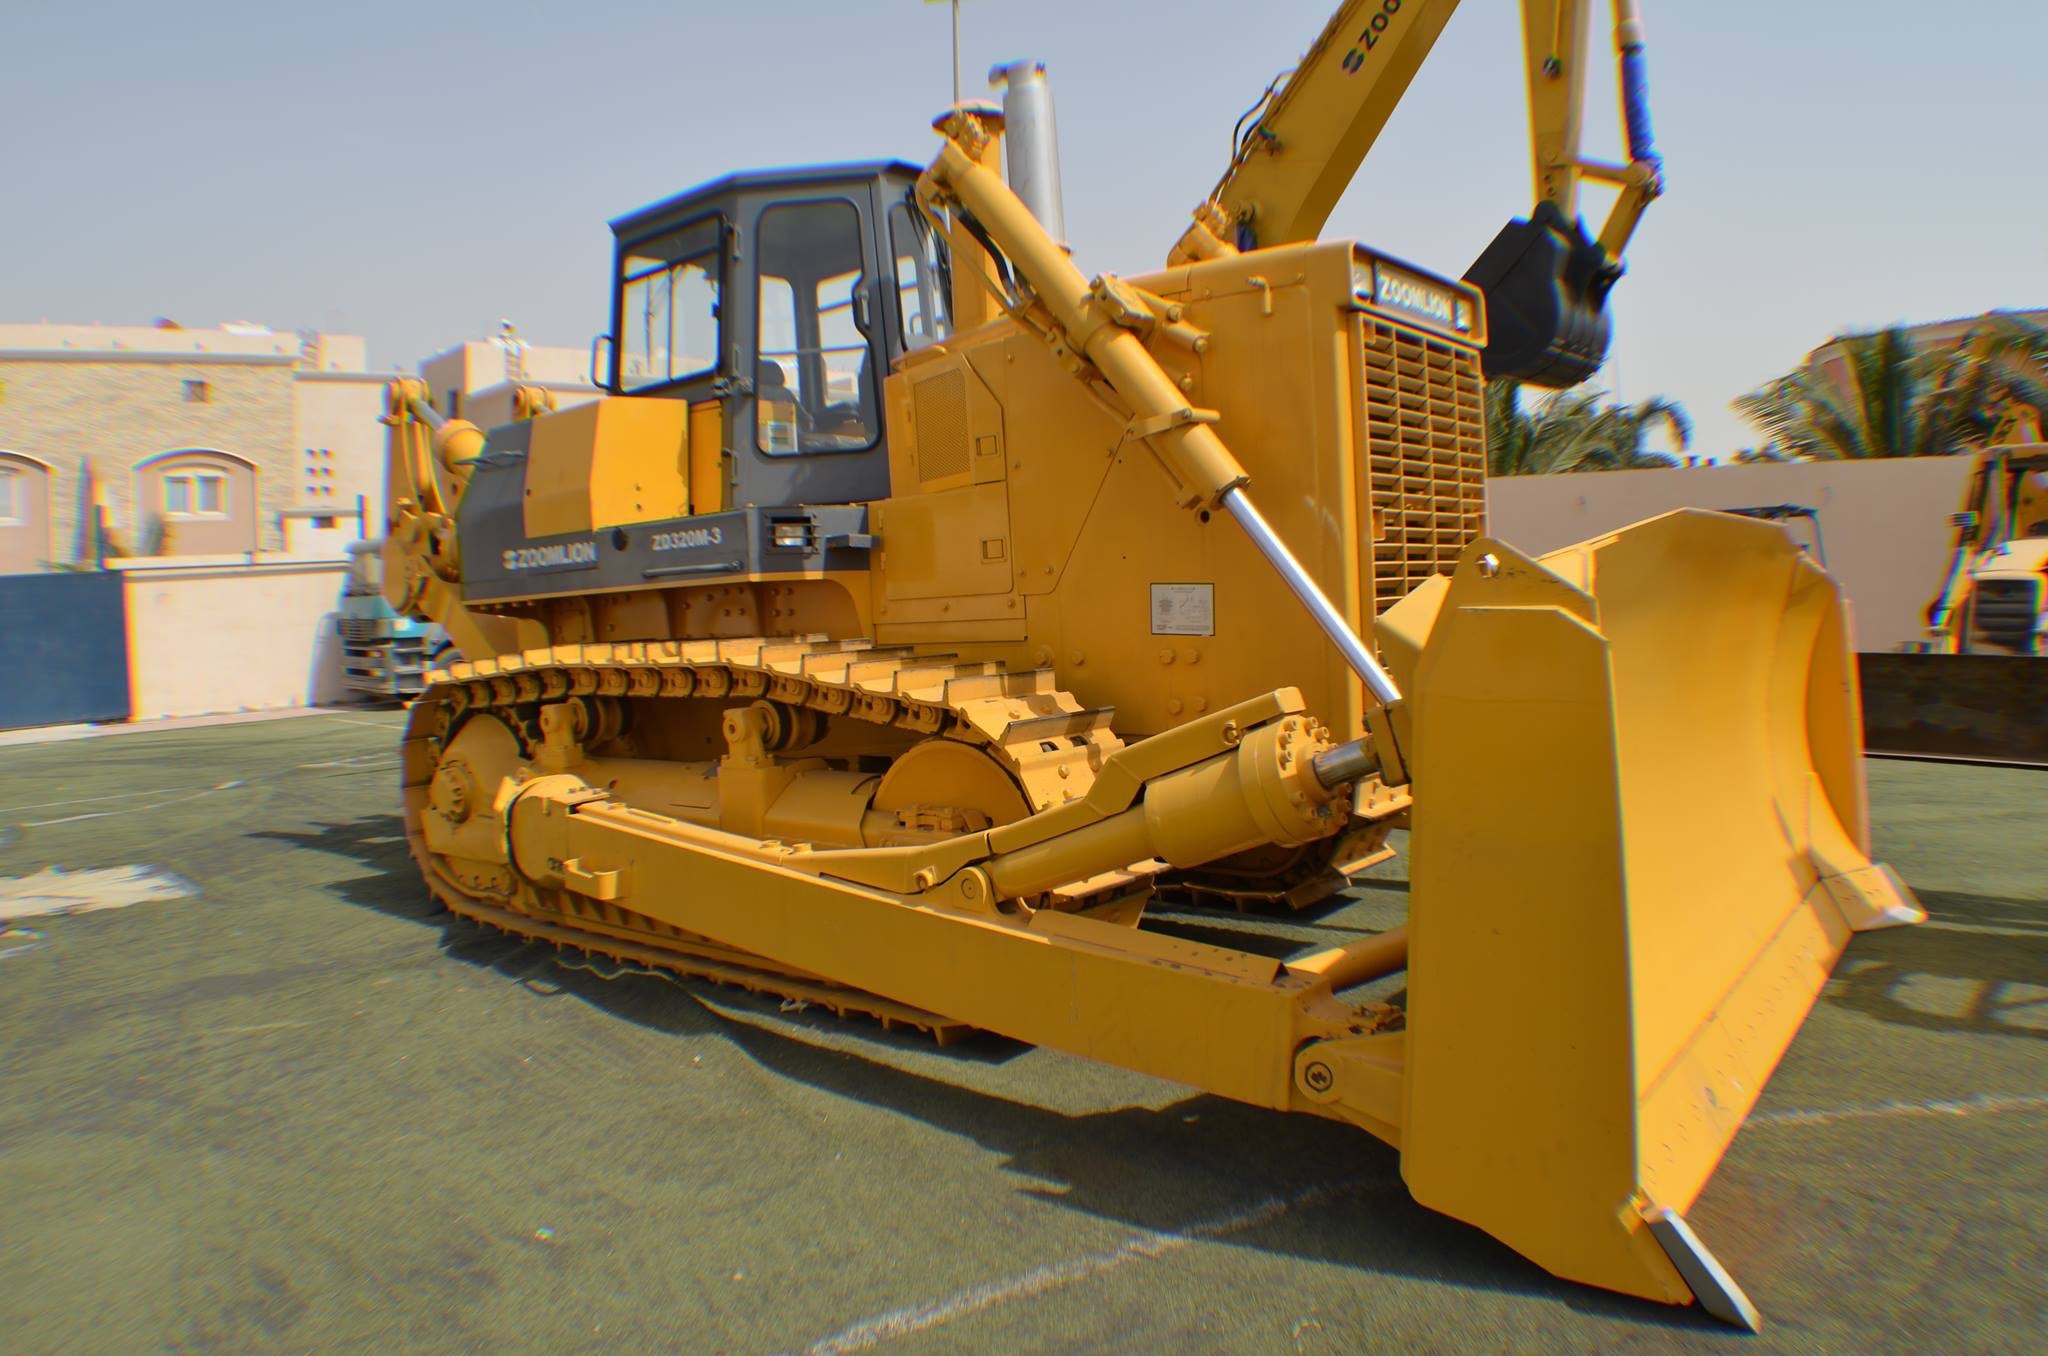 Zoomlion Zd220sh-3 220HP Dozer Bulldozer with Rippers for Sale